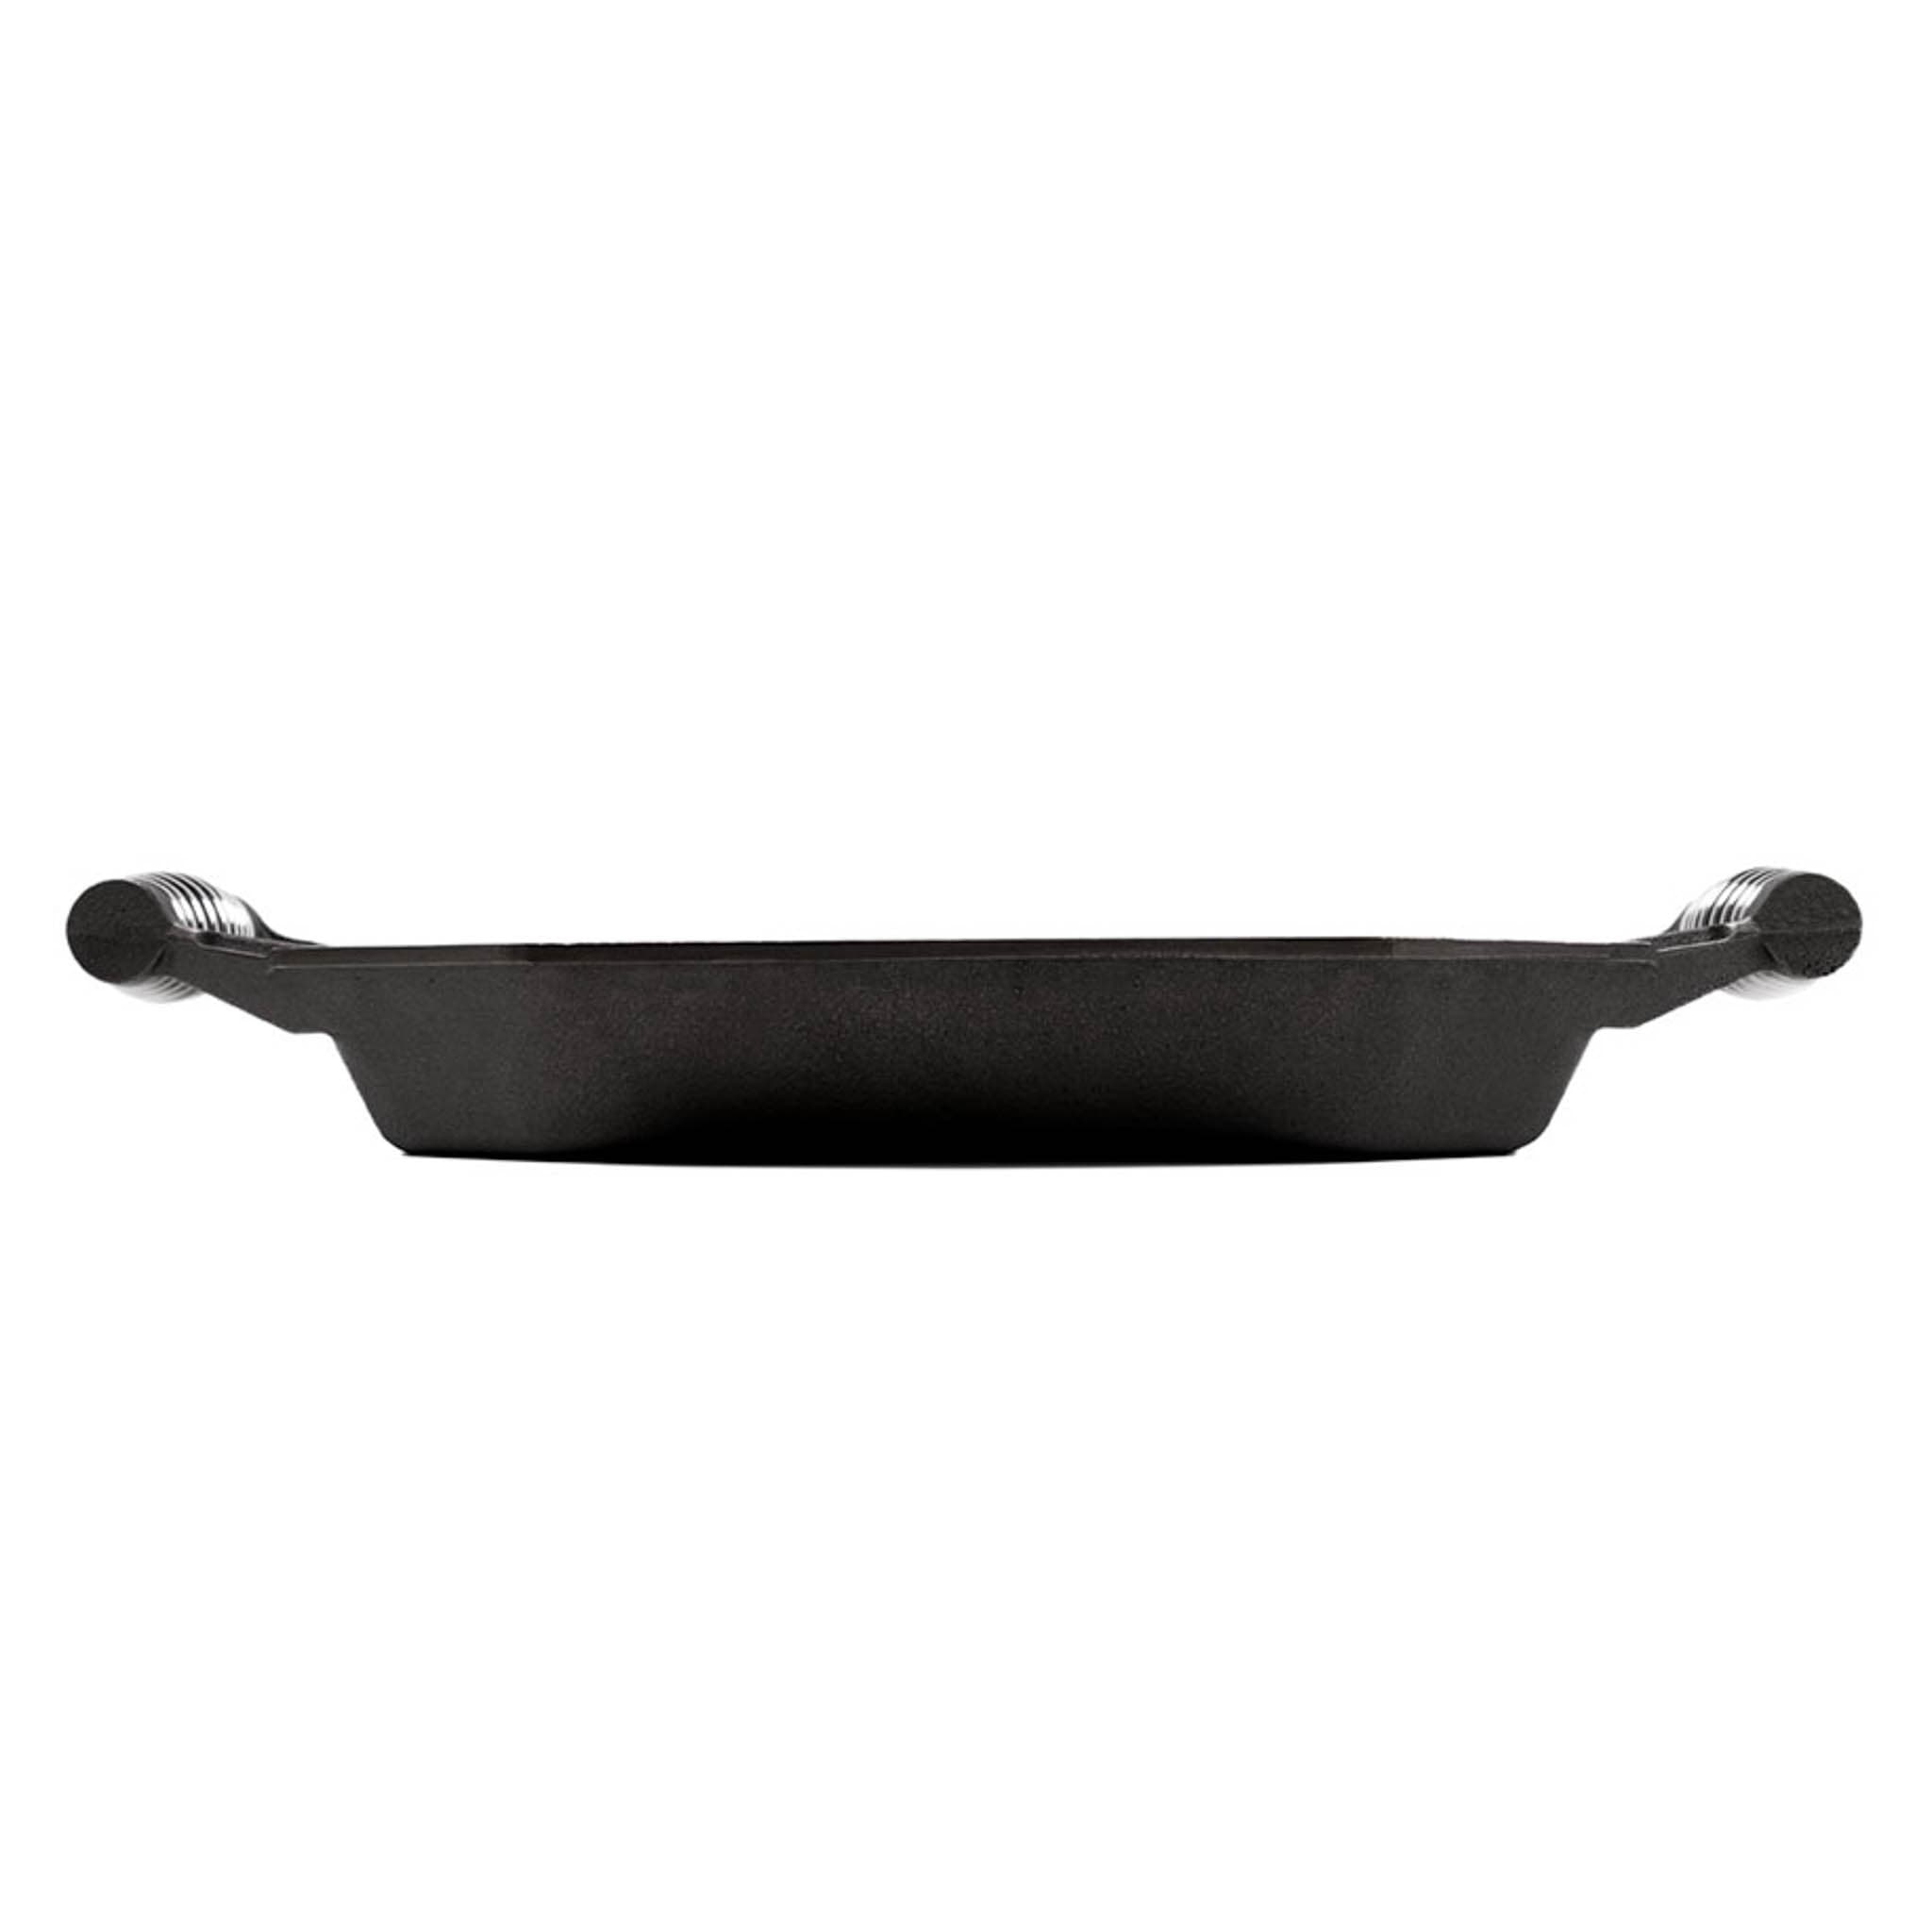 Finex Cast Iron Grill Pan with 2 Handles, 30cm (12inch)